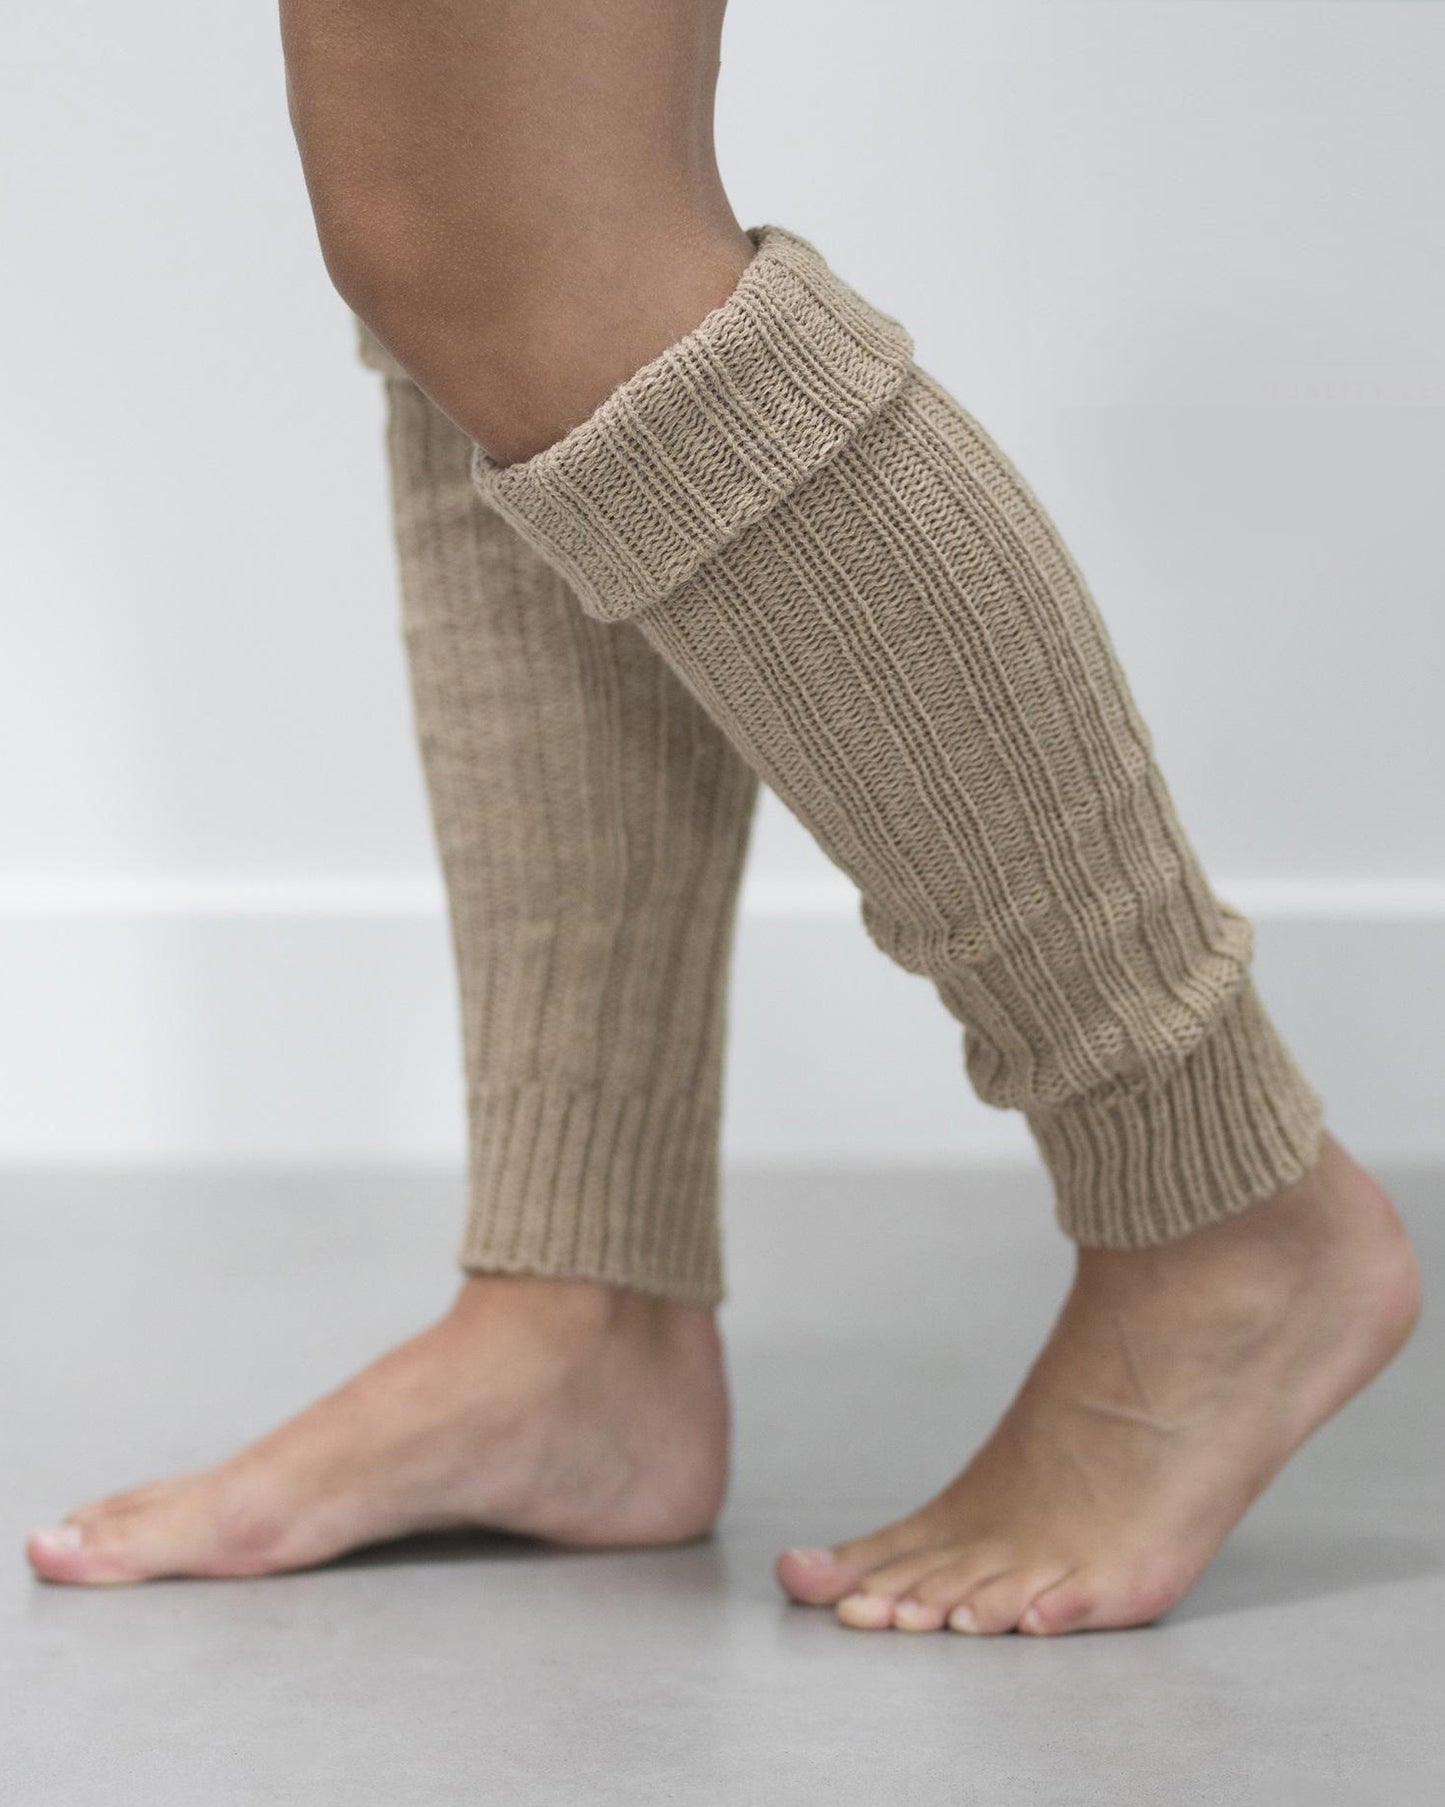 Bonnie Doon Sleever/Legwarmer BE021766 - light taupe oat beige colour wool mix chunky knitted leg warmers